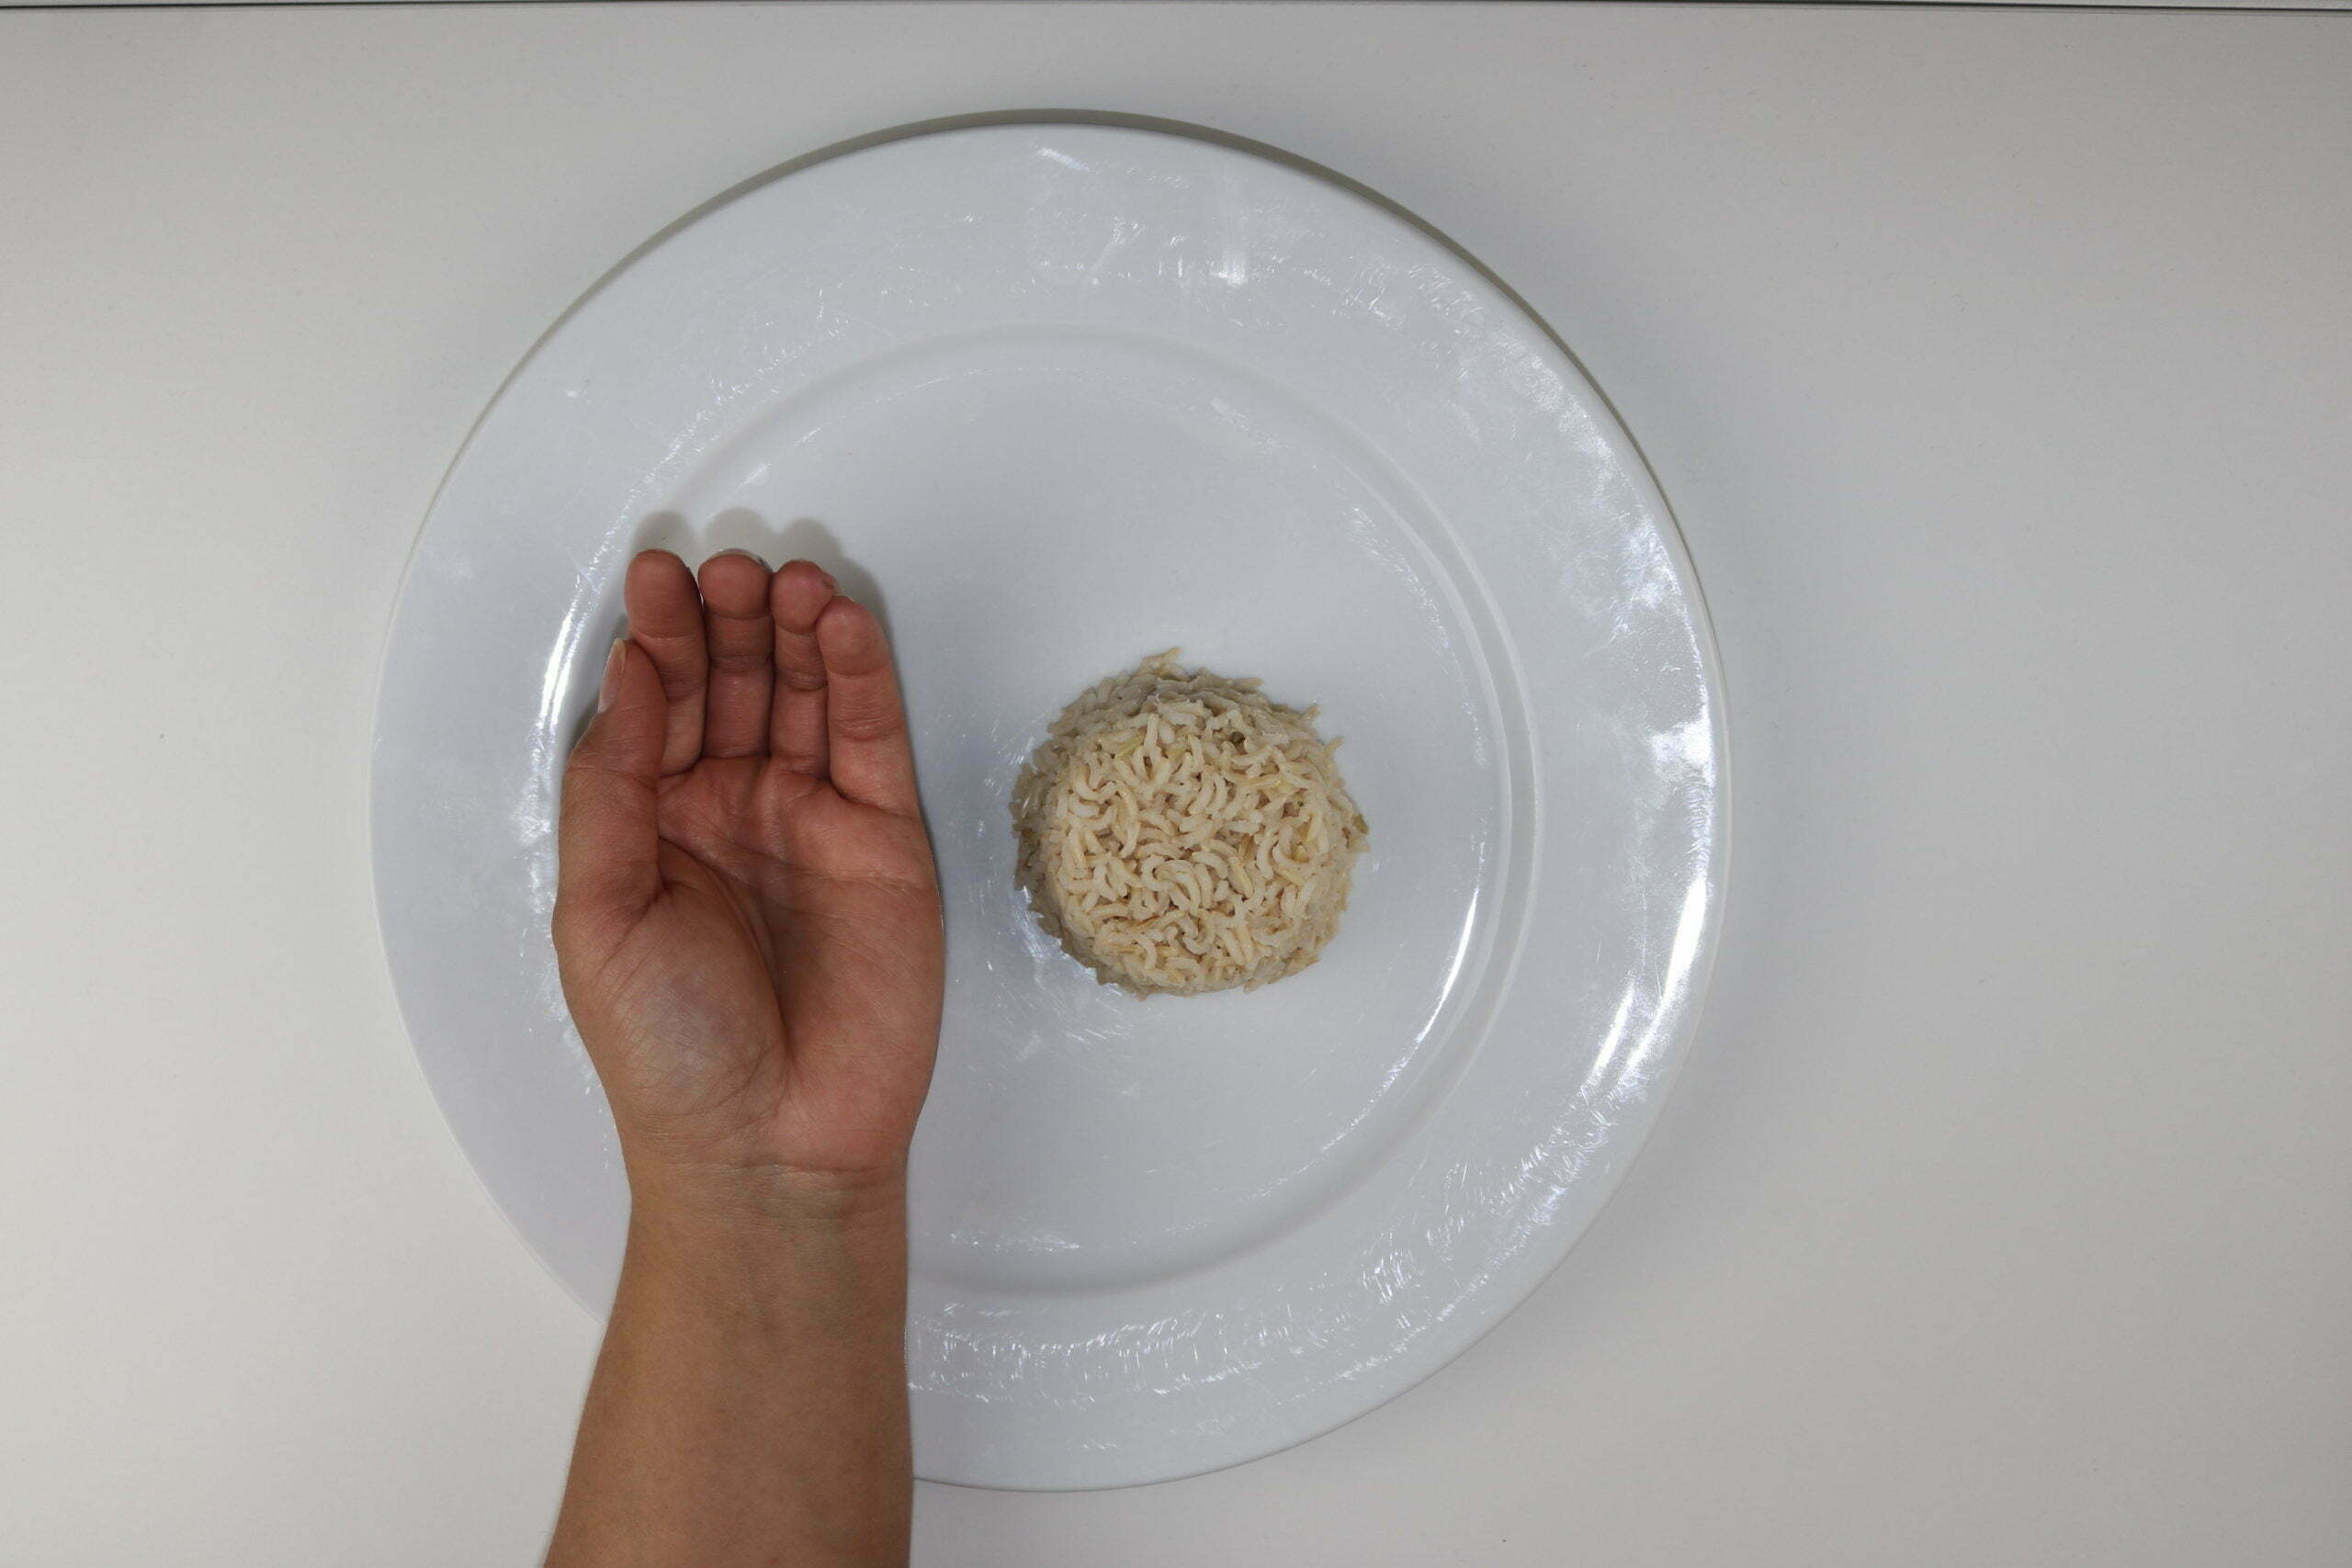 How to manage your portion size